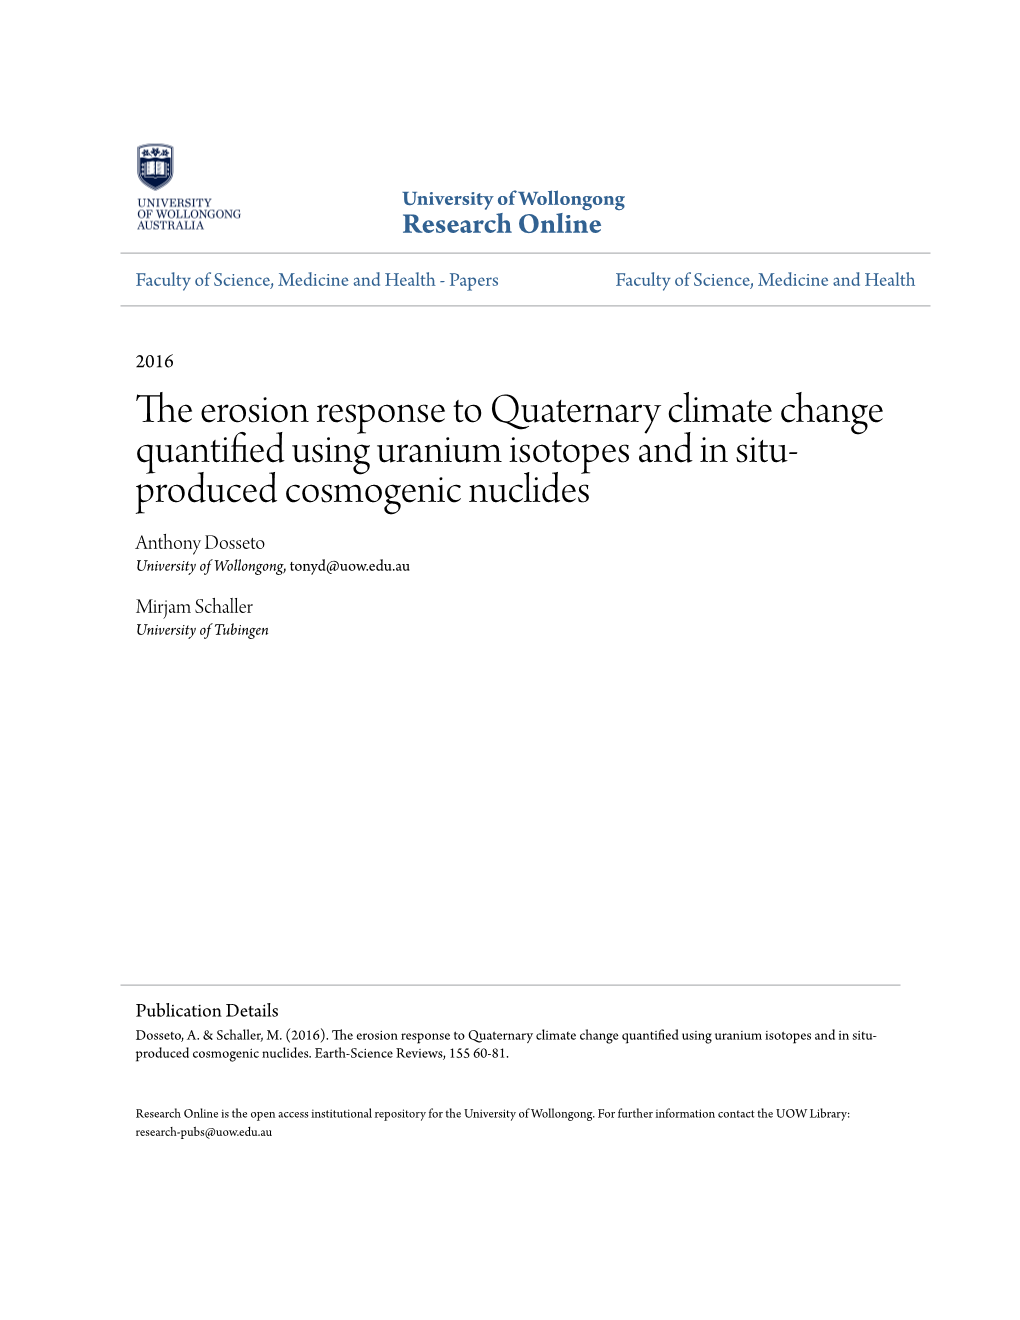 The Erosion Response to Quaternary Climate Change Quantified Using Uranium Isotopes And